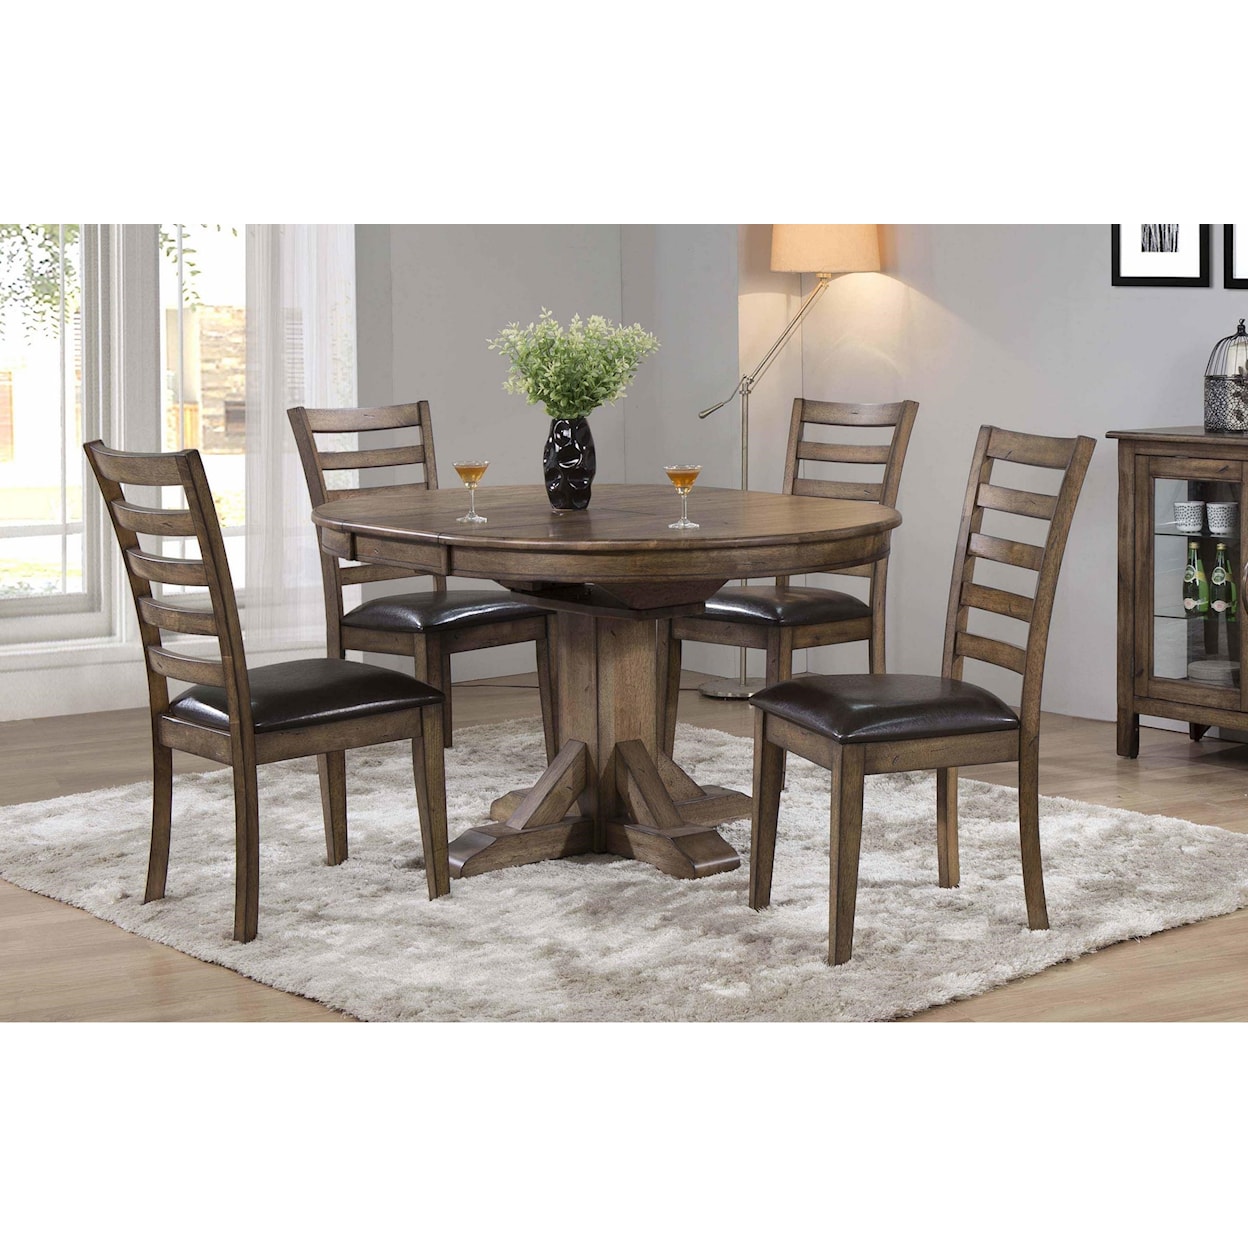 Winners Only Newport 5 Pc. Dining Set